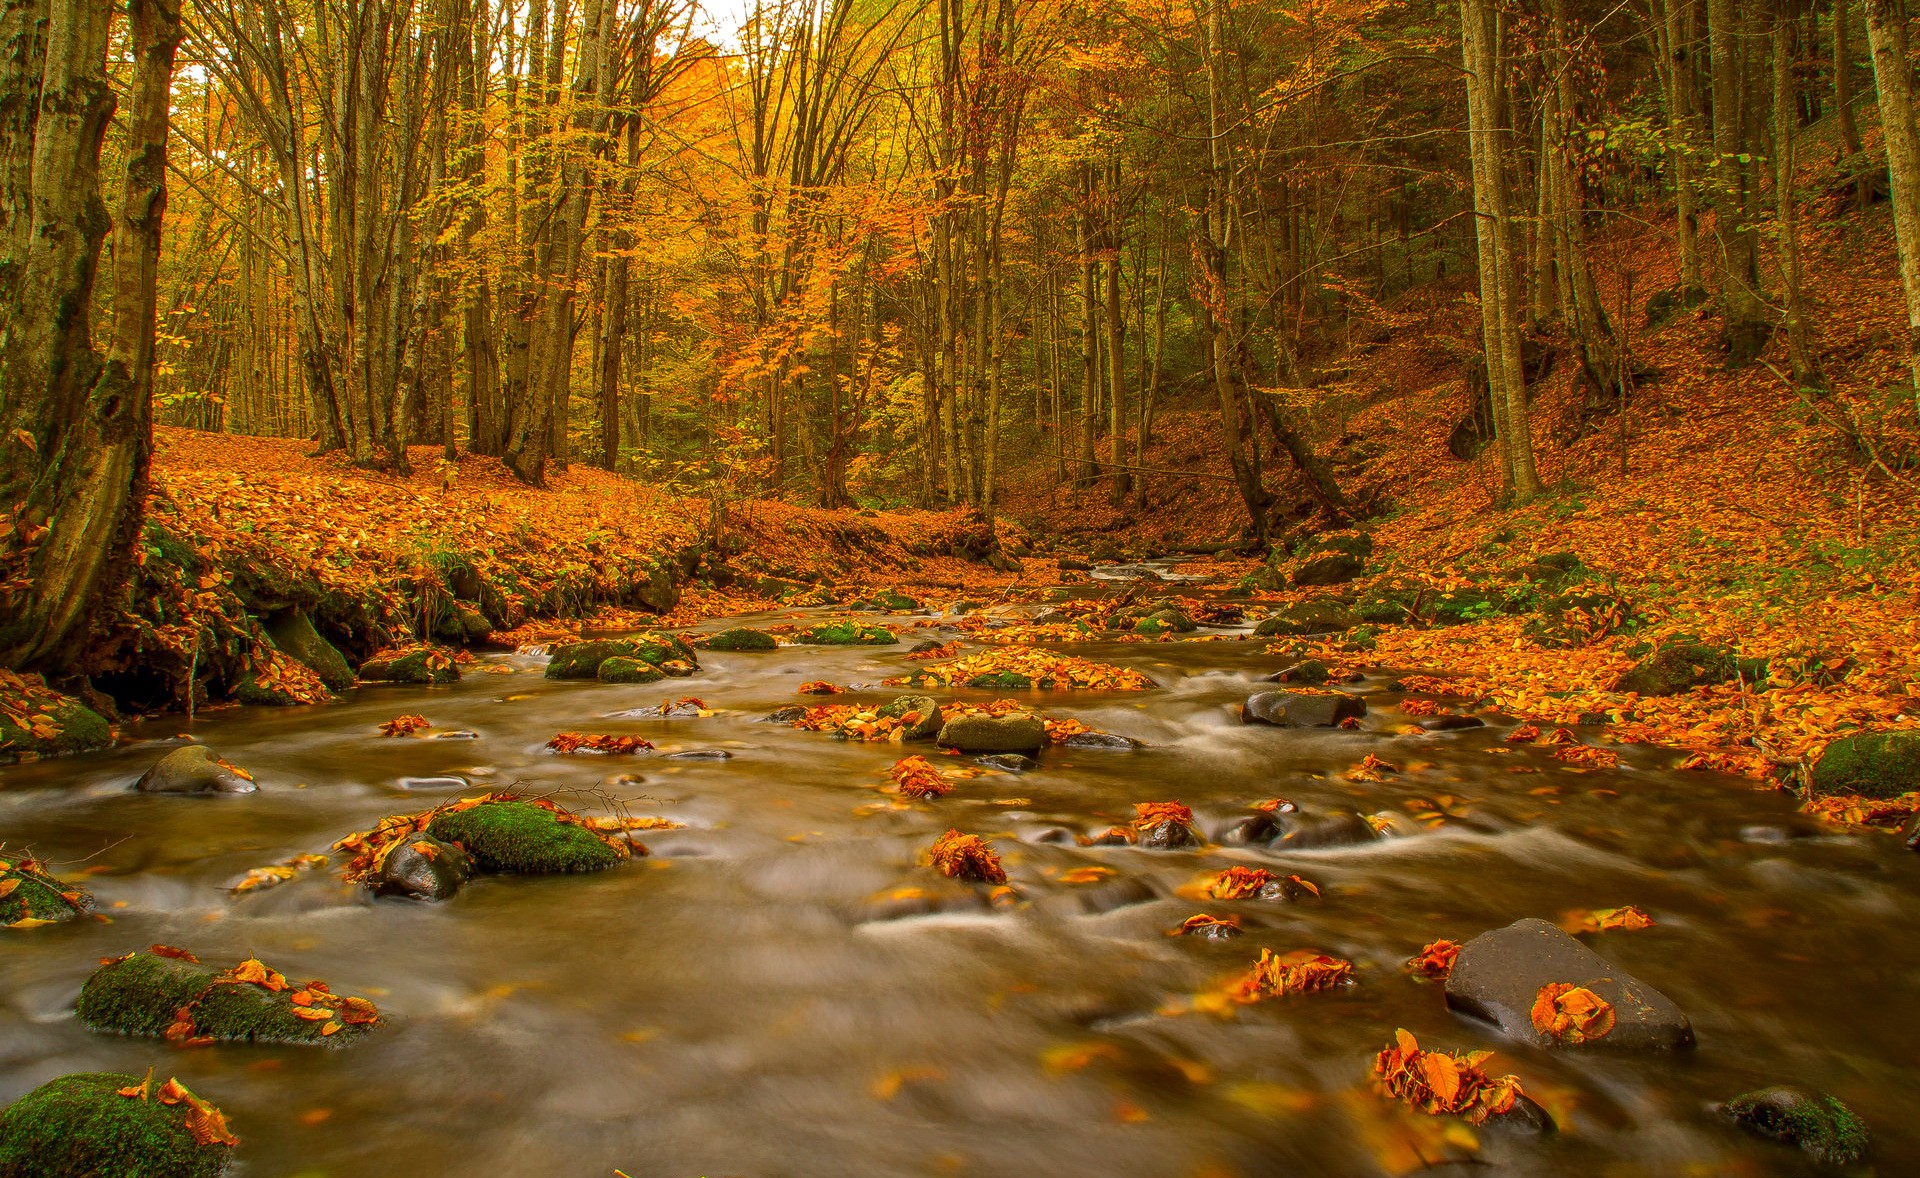 Forest: Autumn Stream Serenity Golden Colors Fall Nature Creek ...